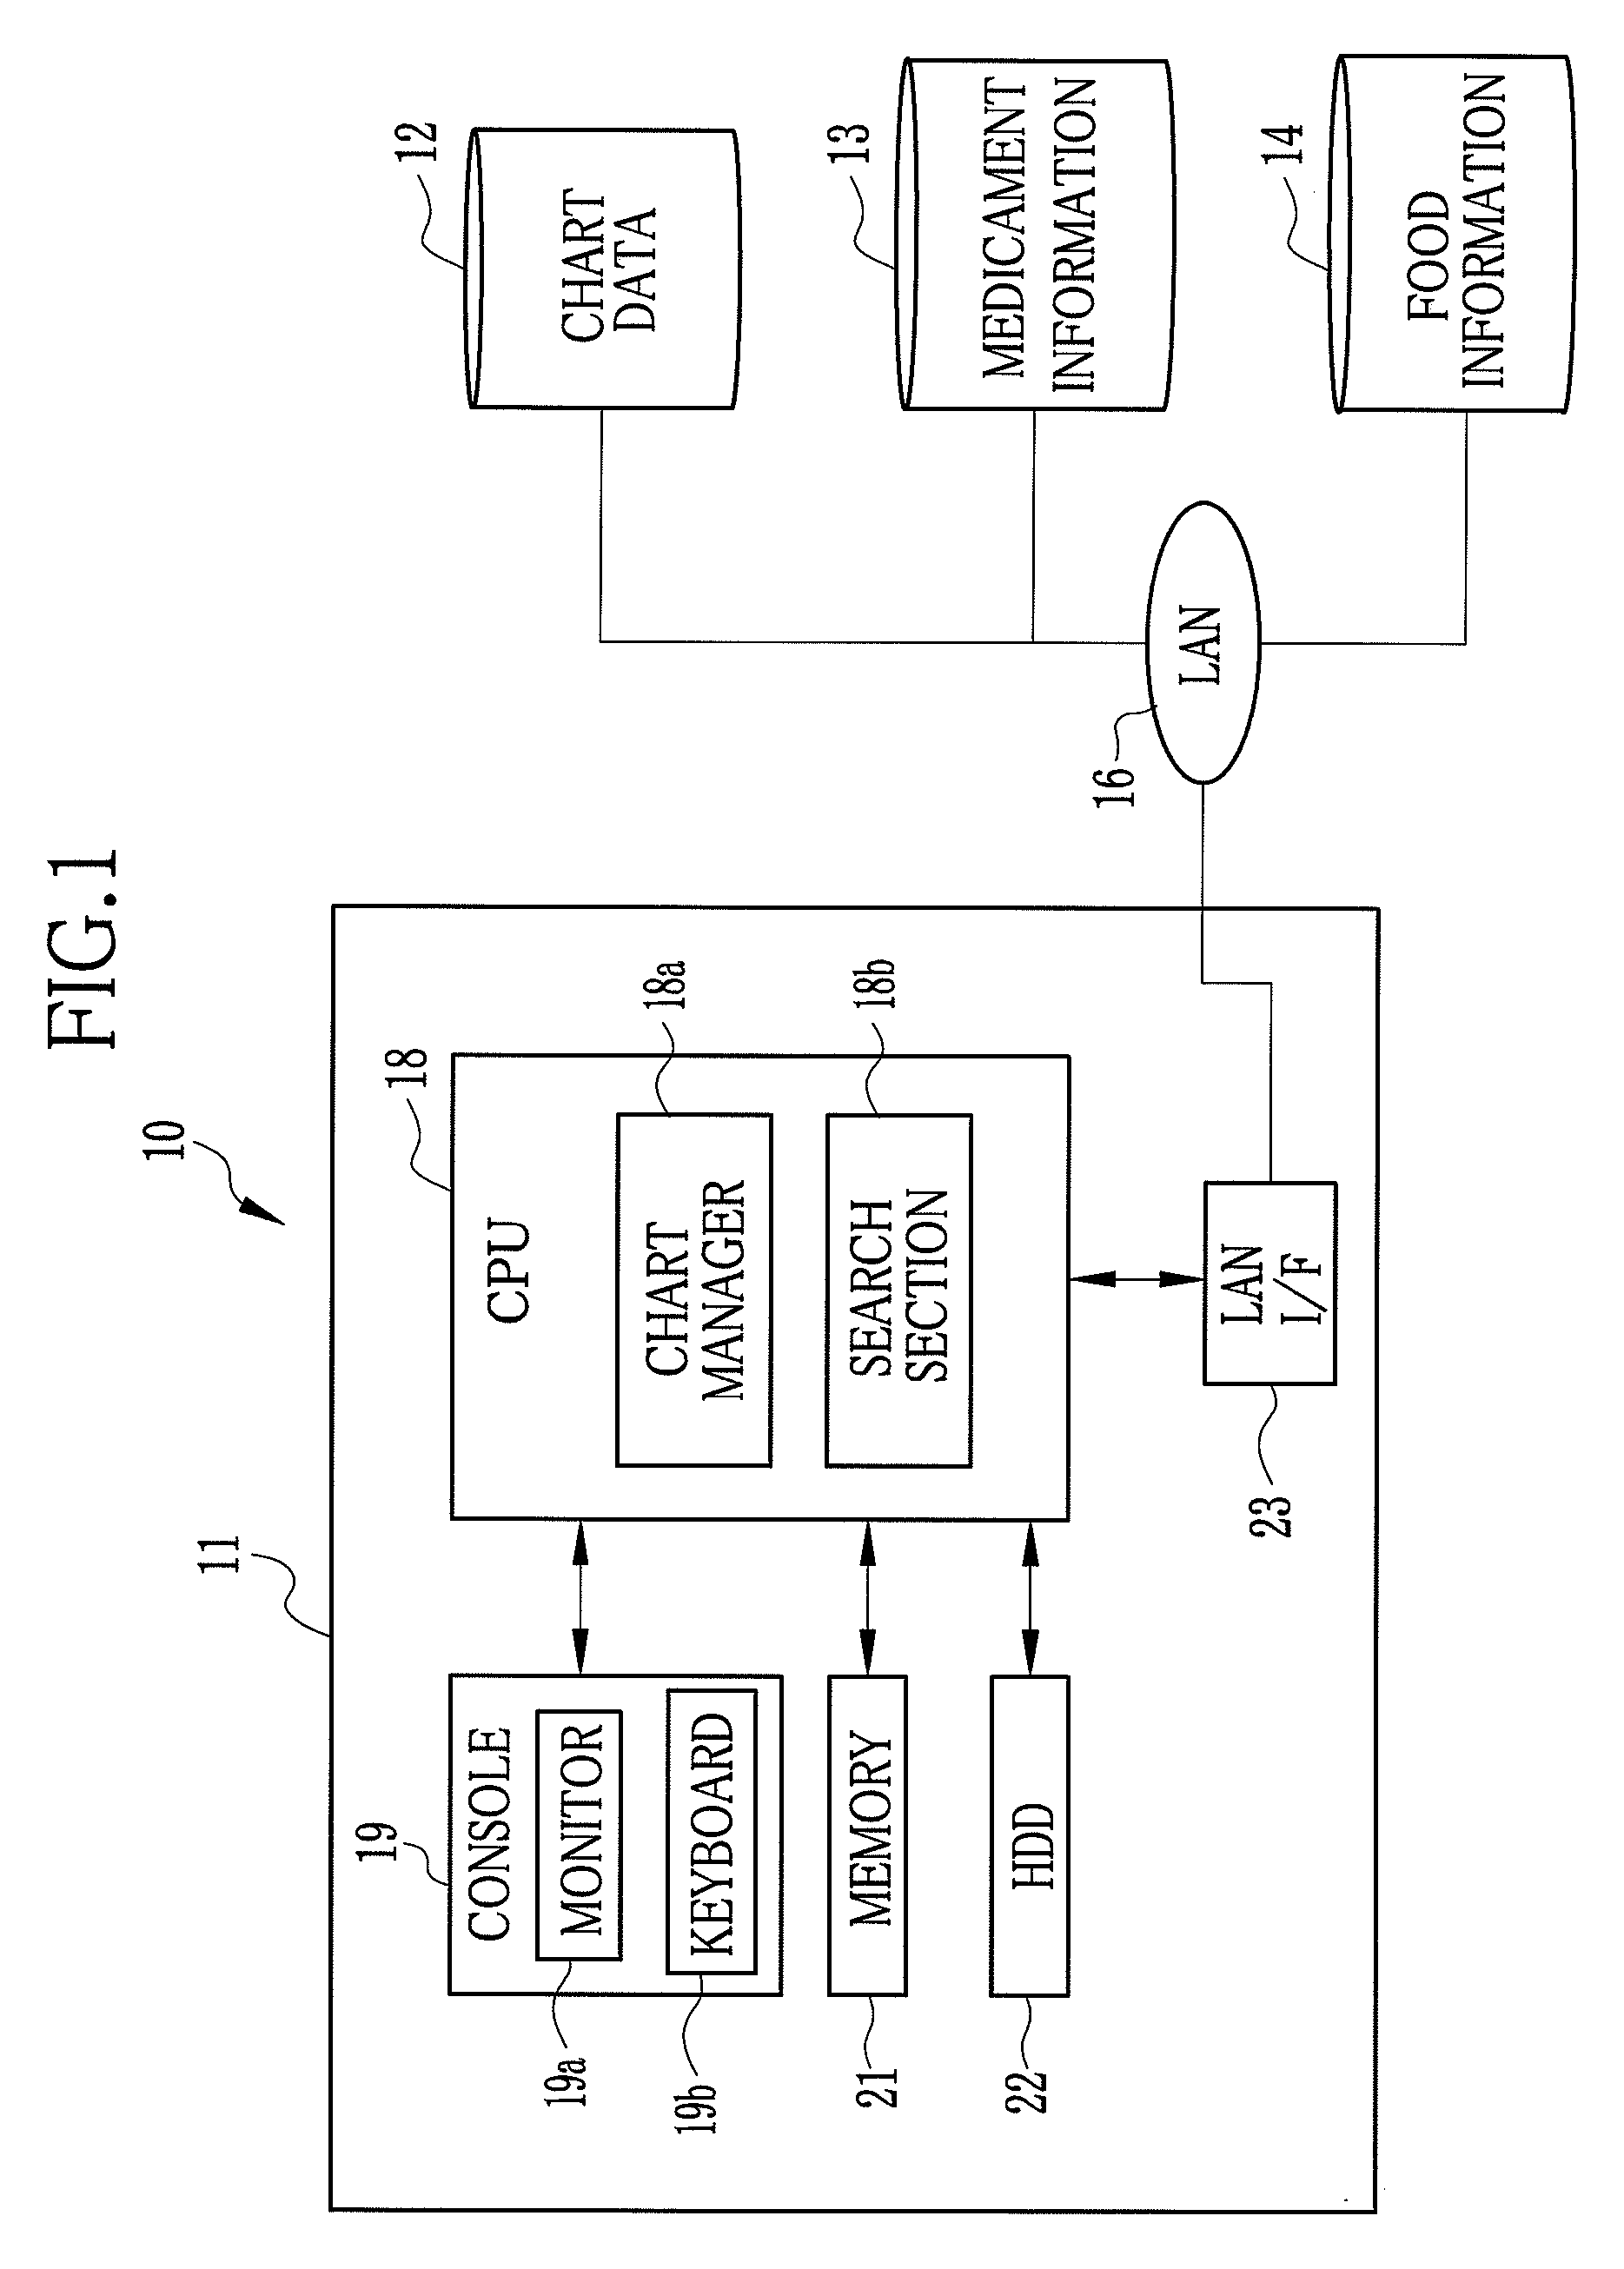 Electronic chart apparatus and a dietary instruction support method